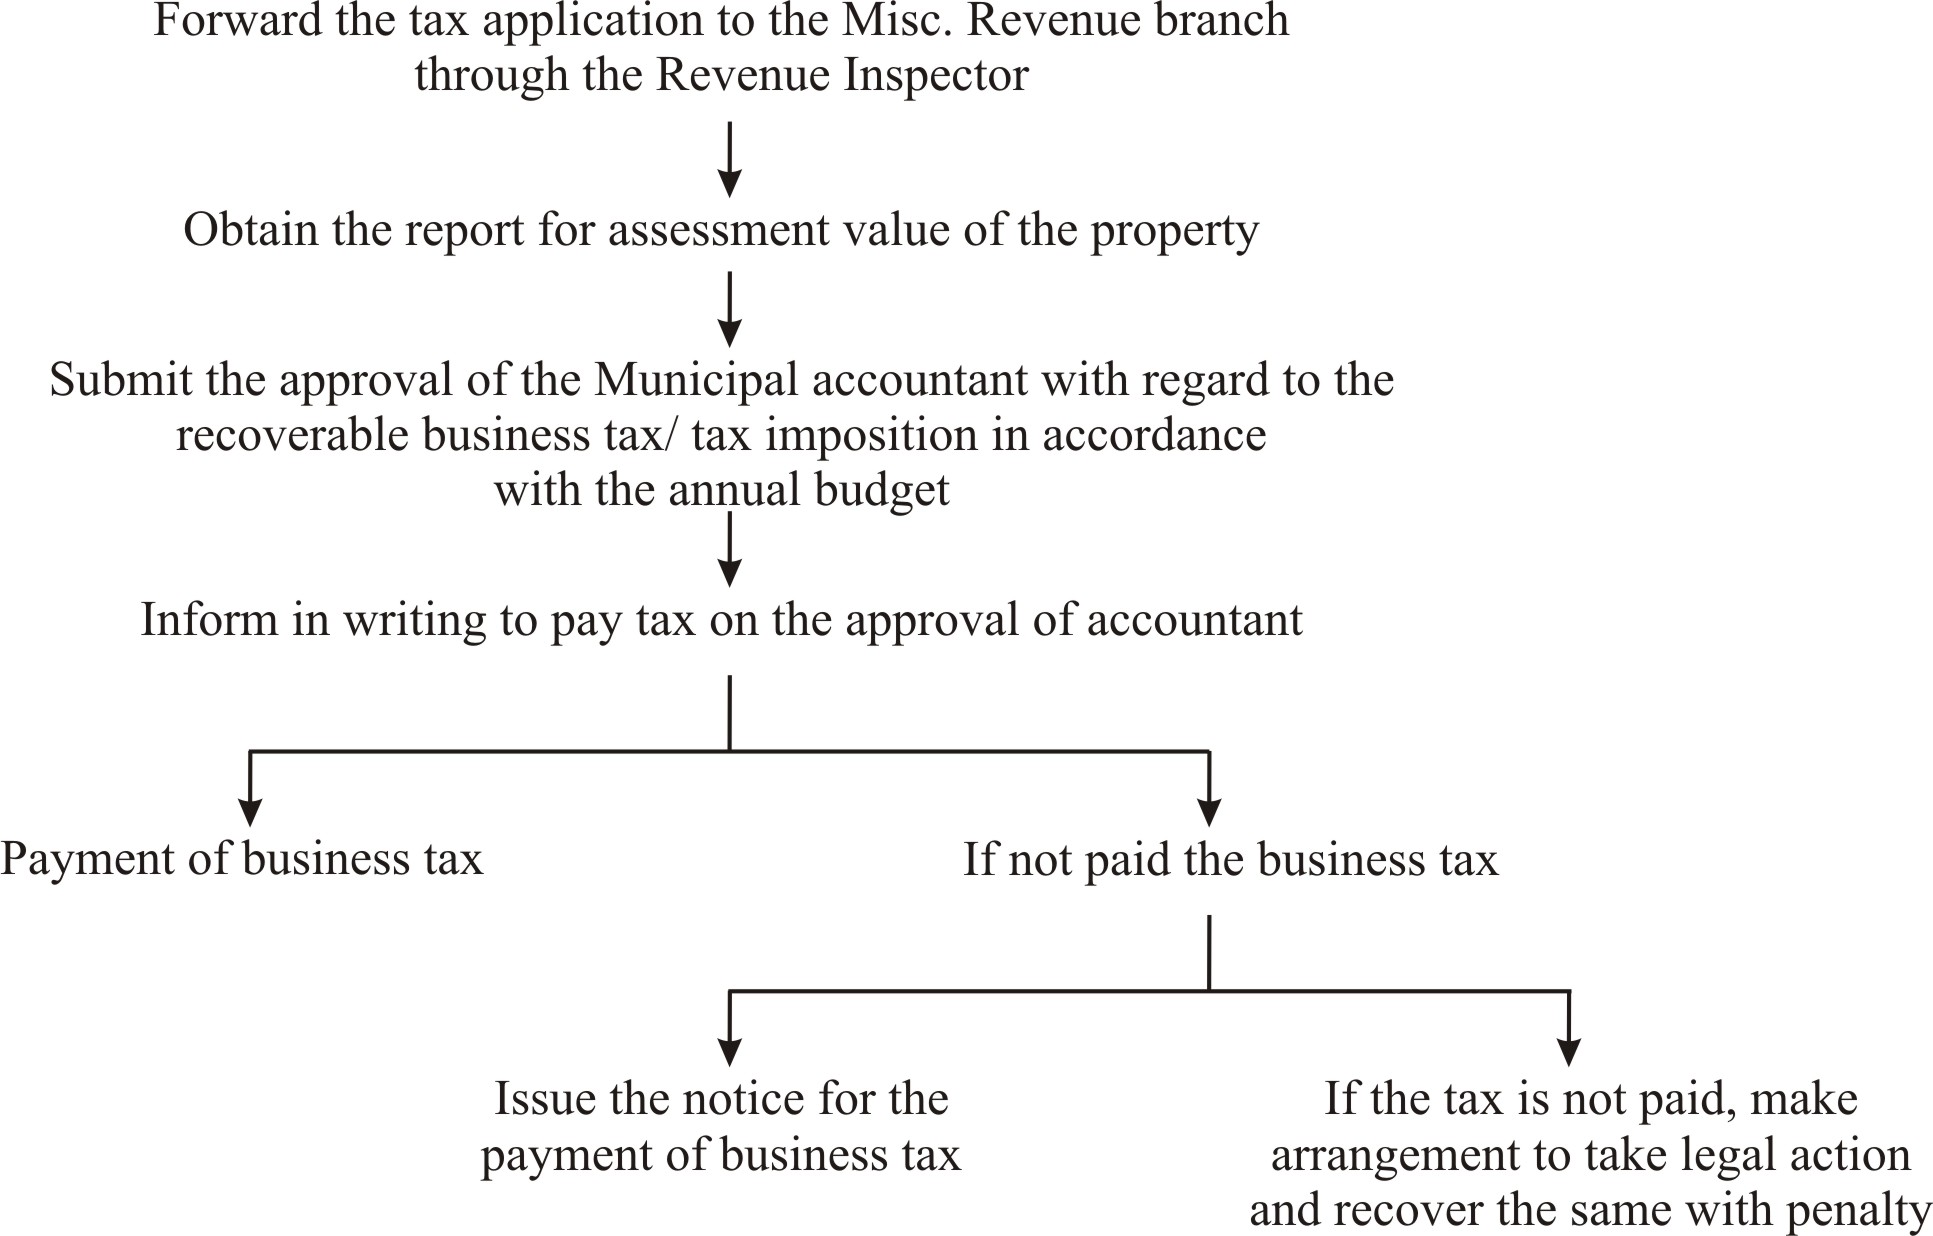 Payment of business taxes